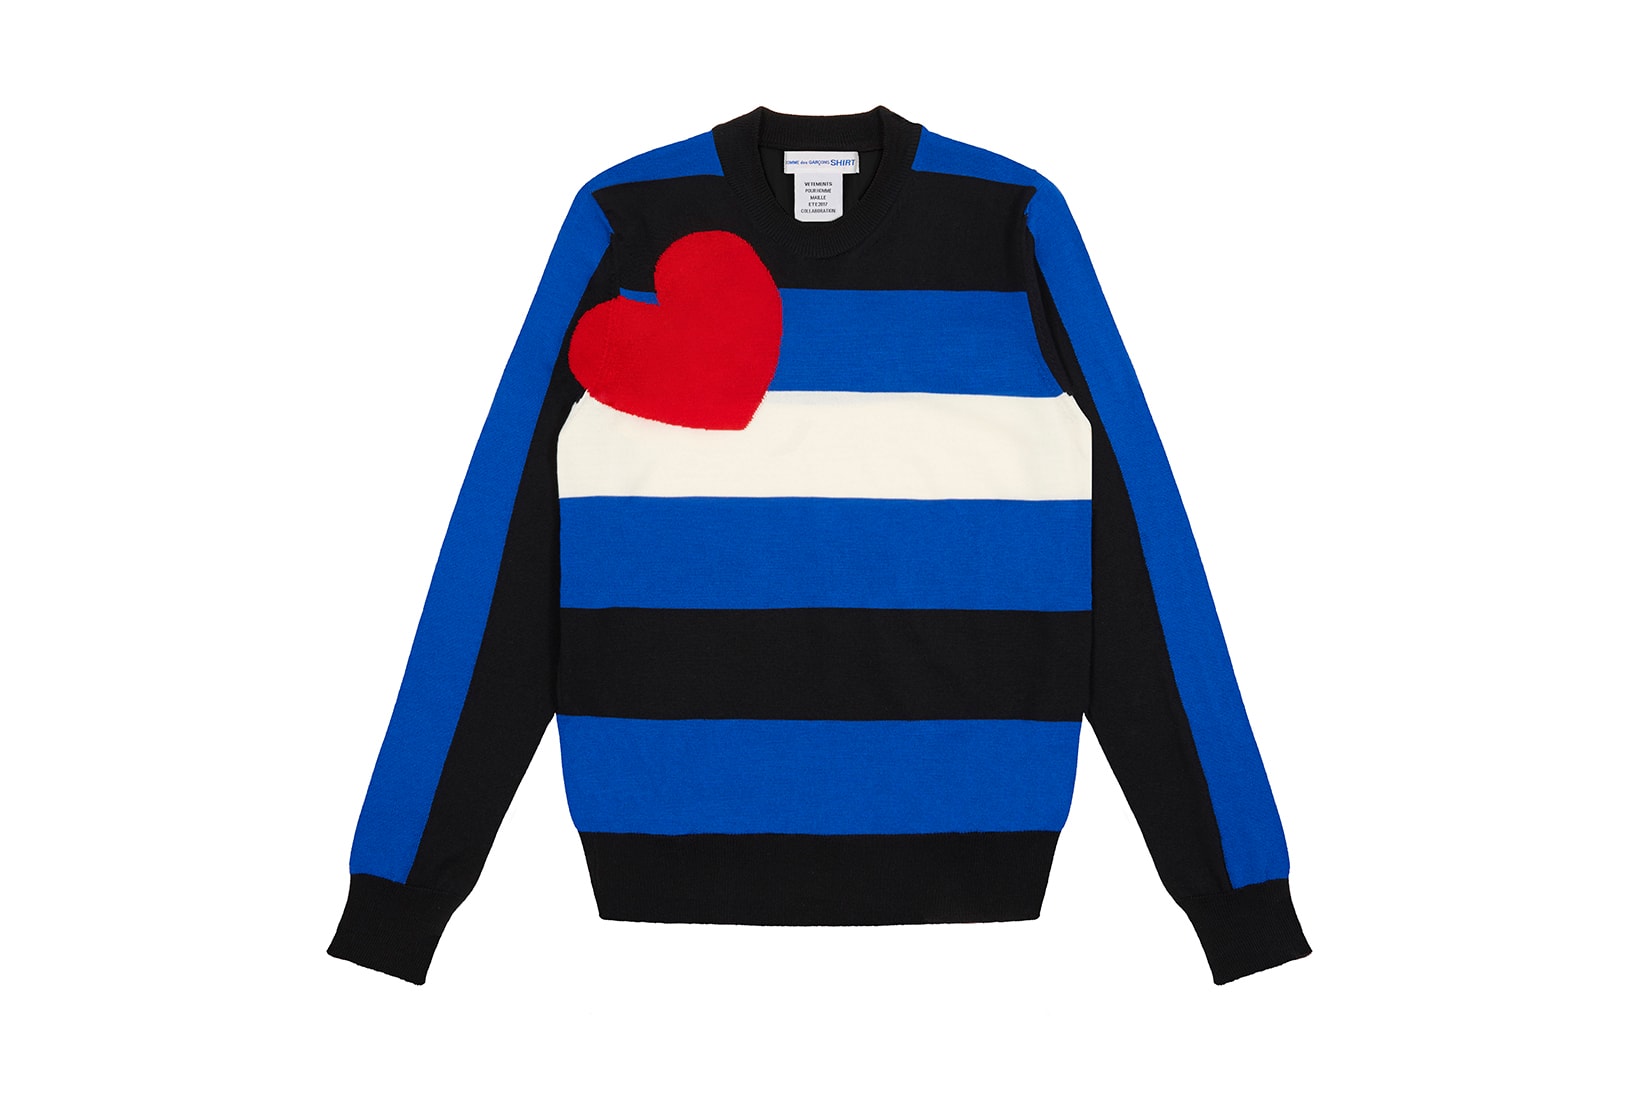 COMME des GARCONS x Vetements Gay Lesbian and Fetish Sweater Collection